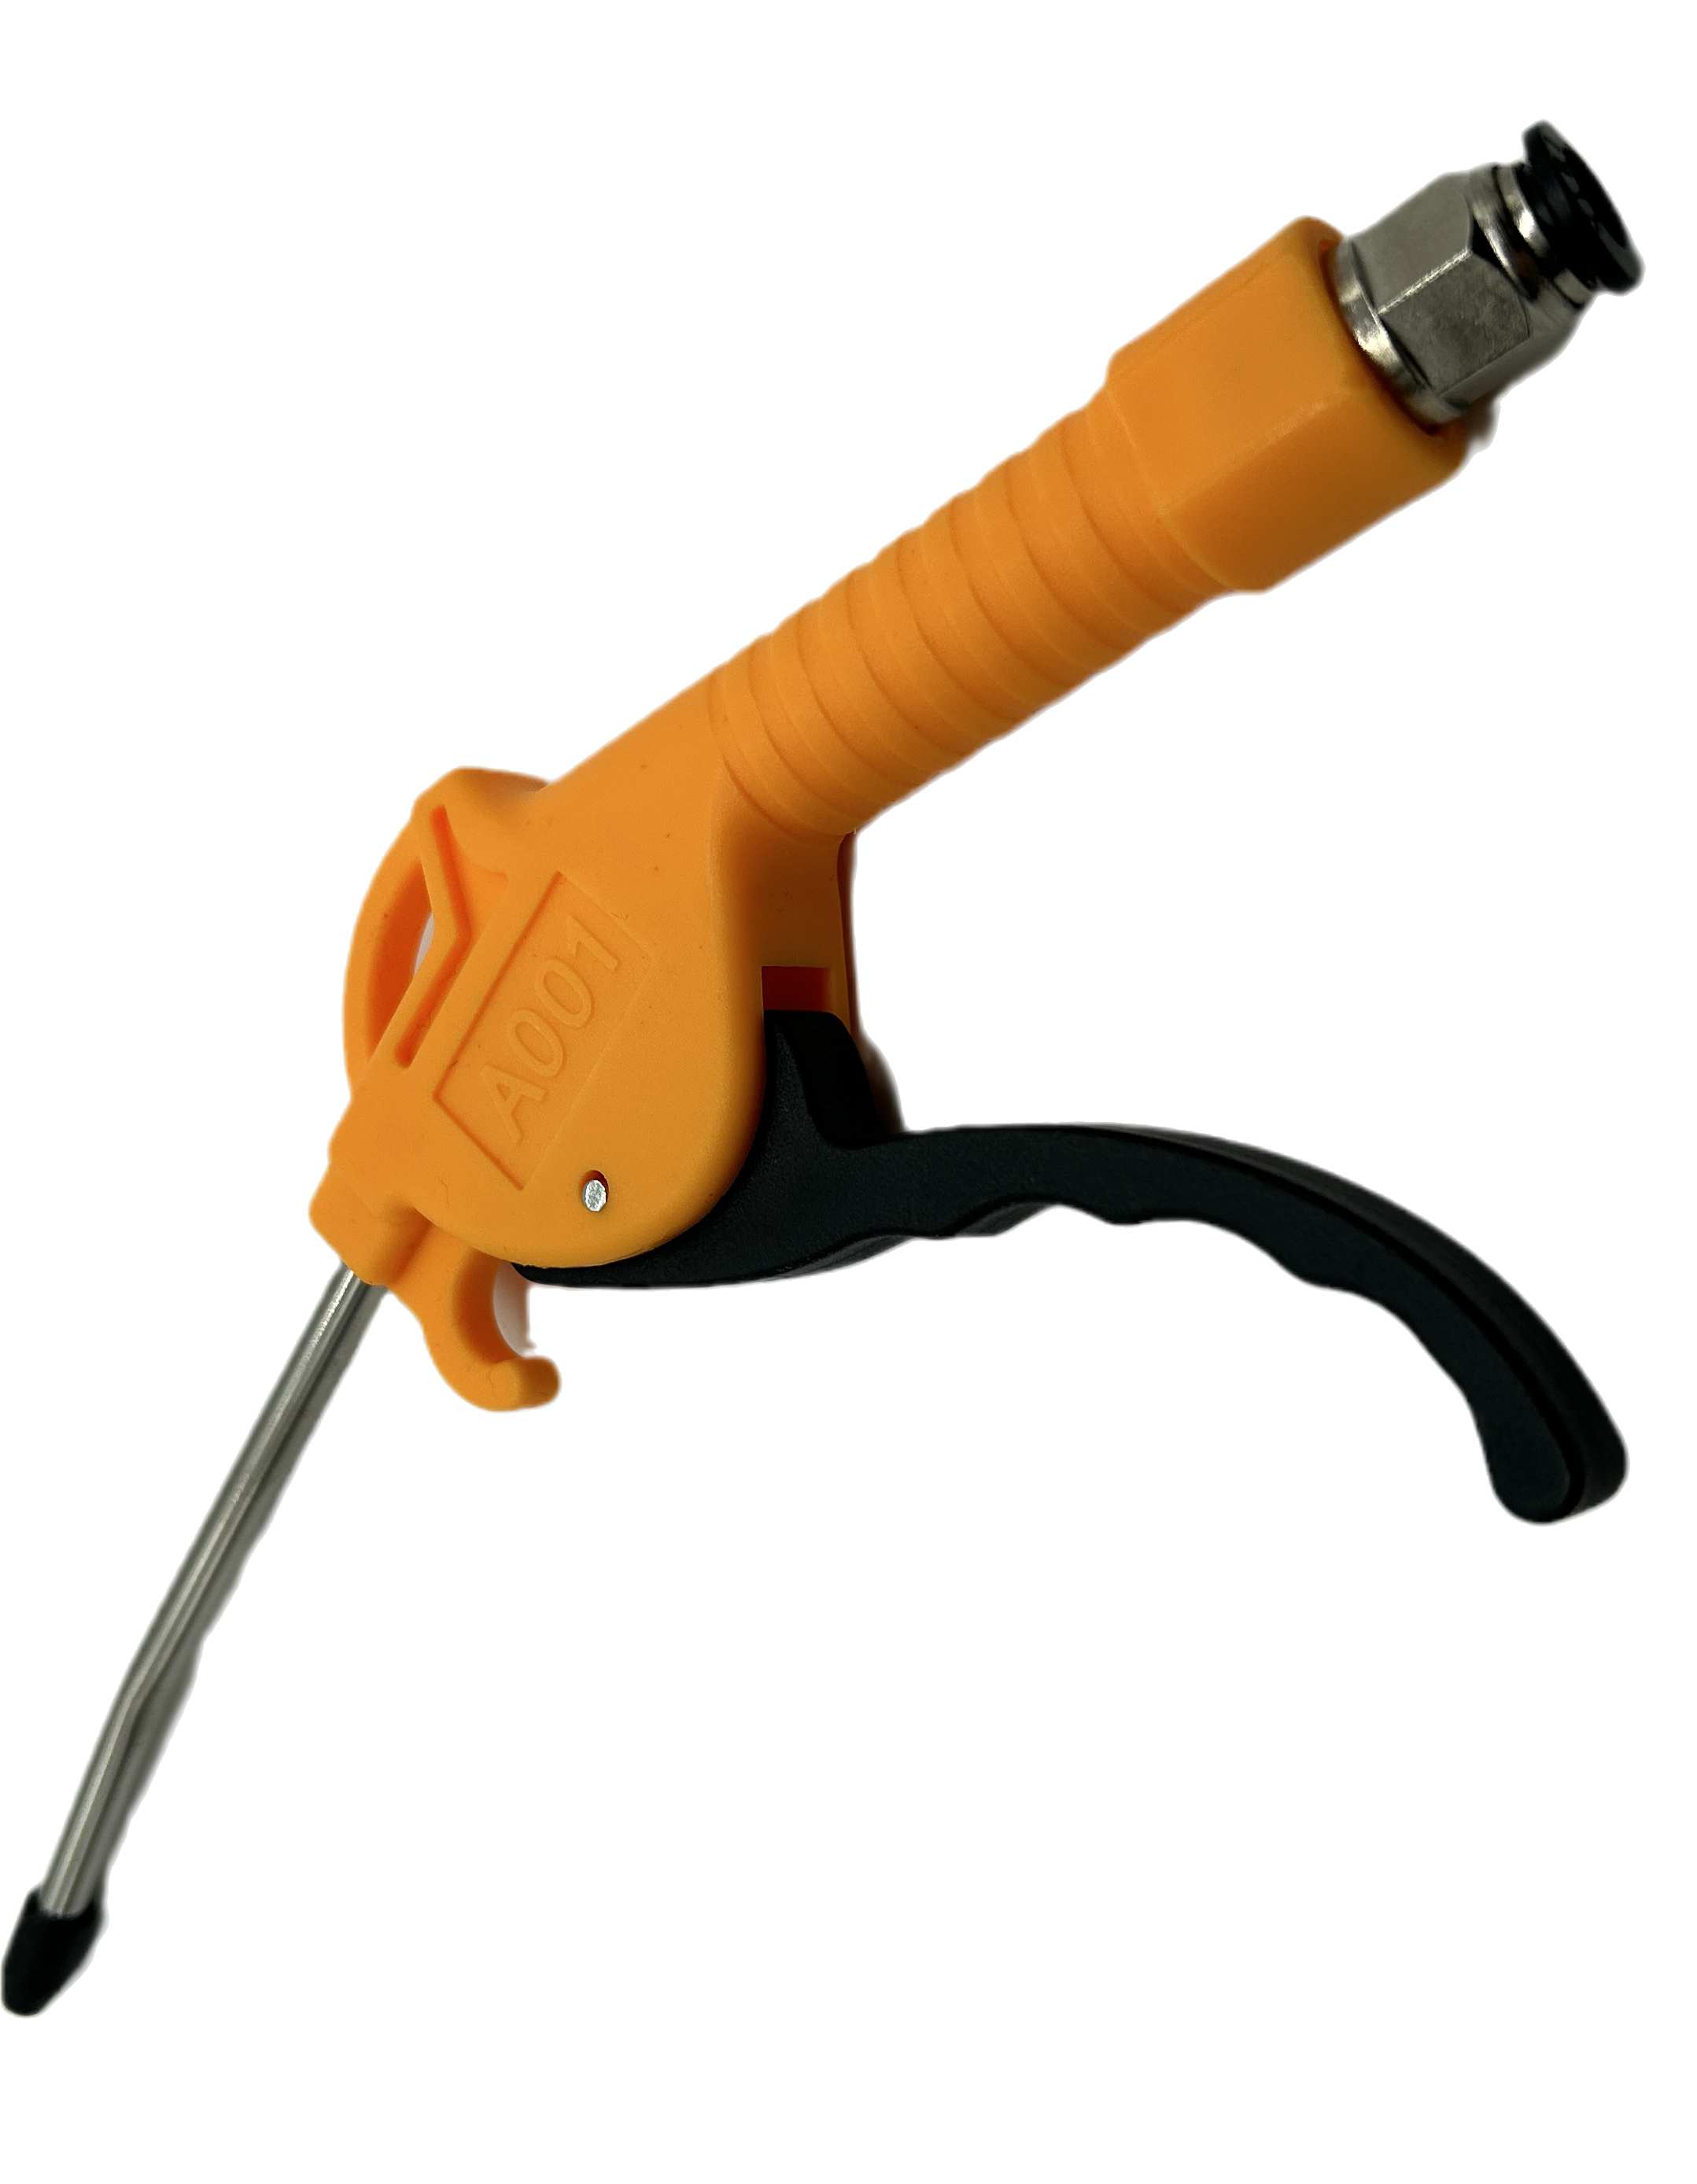 Shanneisi type pneumatic dust gun, dust removal, air blowing, water removal, short nozzle dust gun, and 8mm quick plug connector